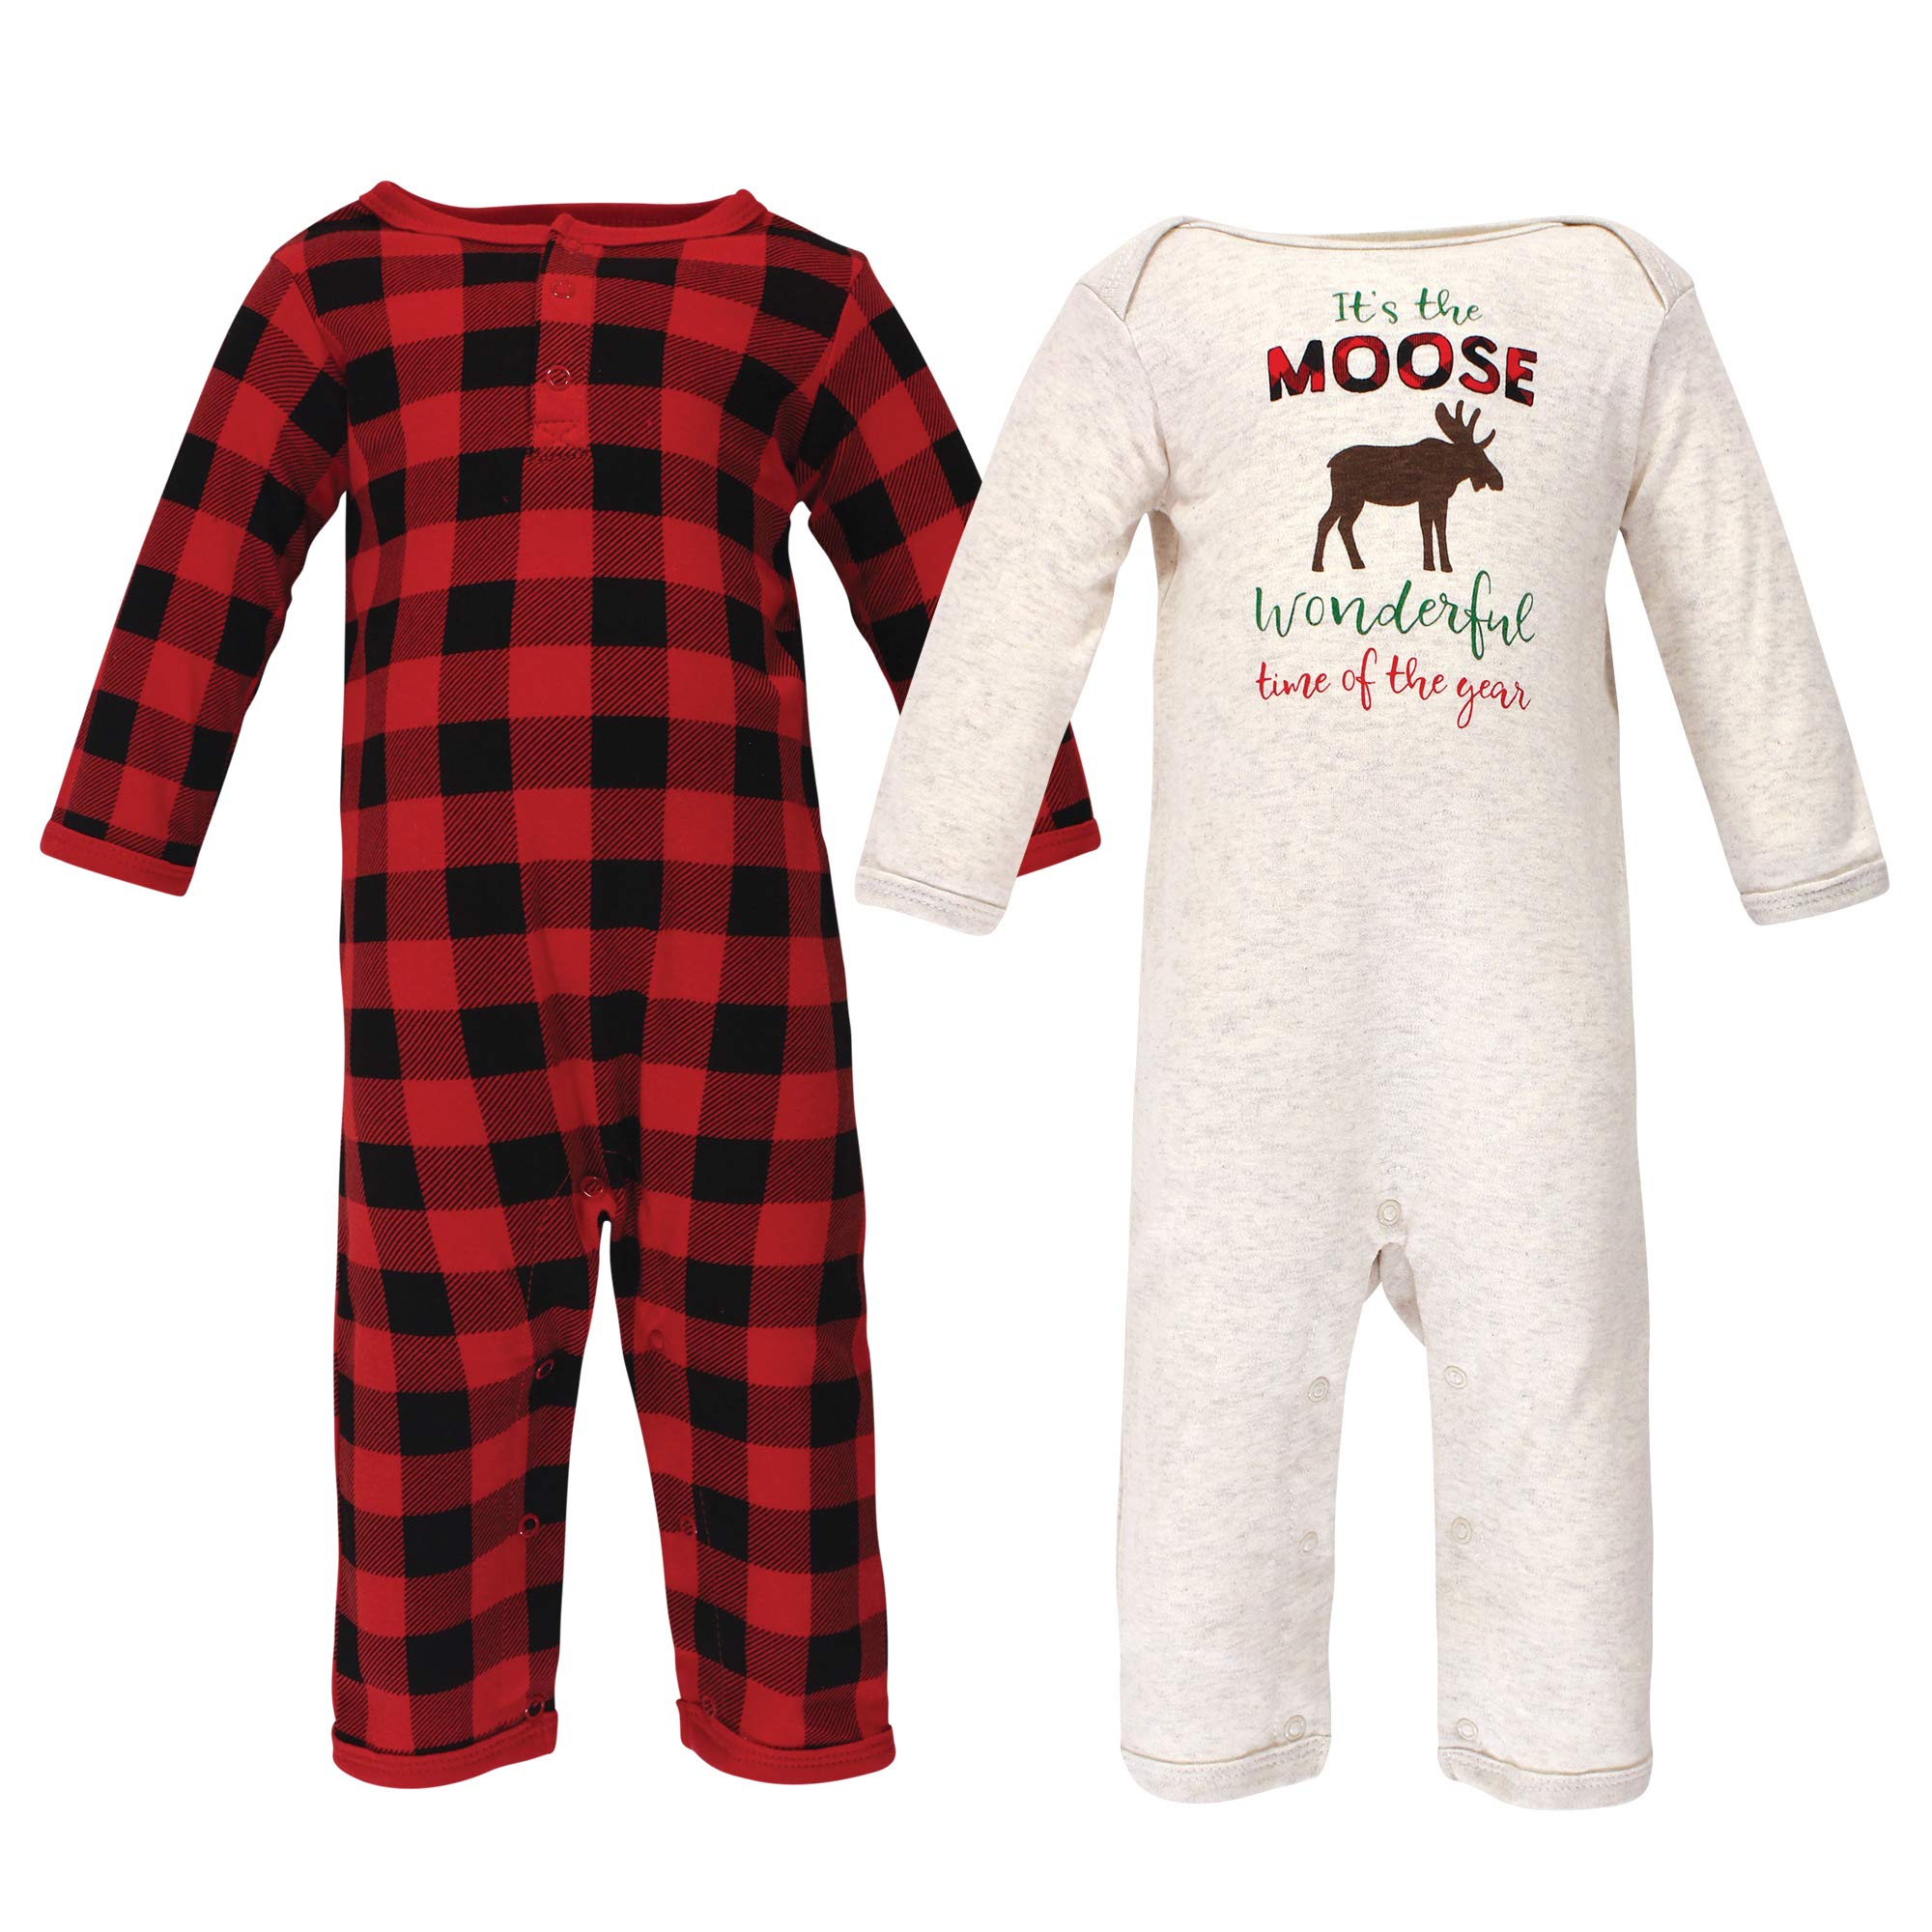 Hudson Baby Unisex Baby cotton coveralls Moose Wonderful Time, 6-9 Months